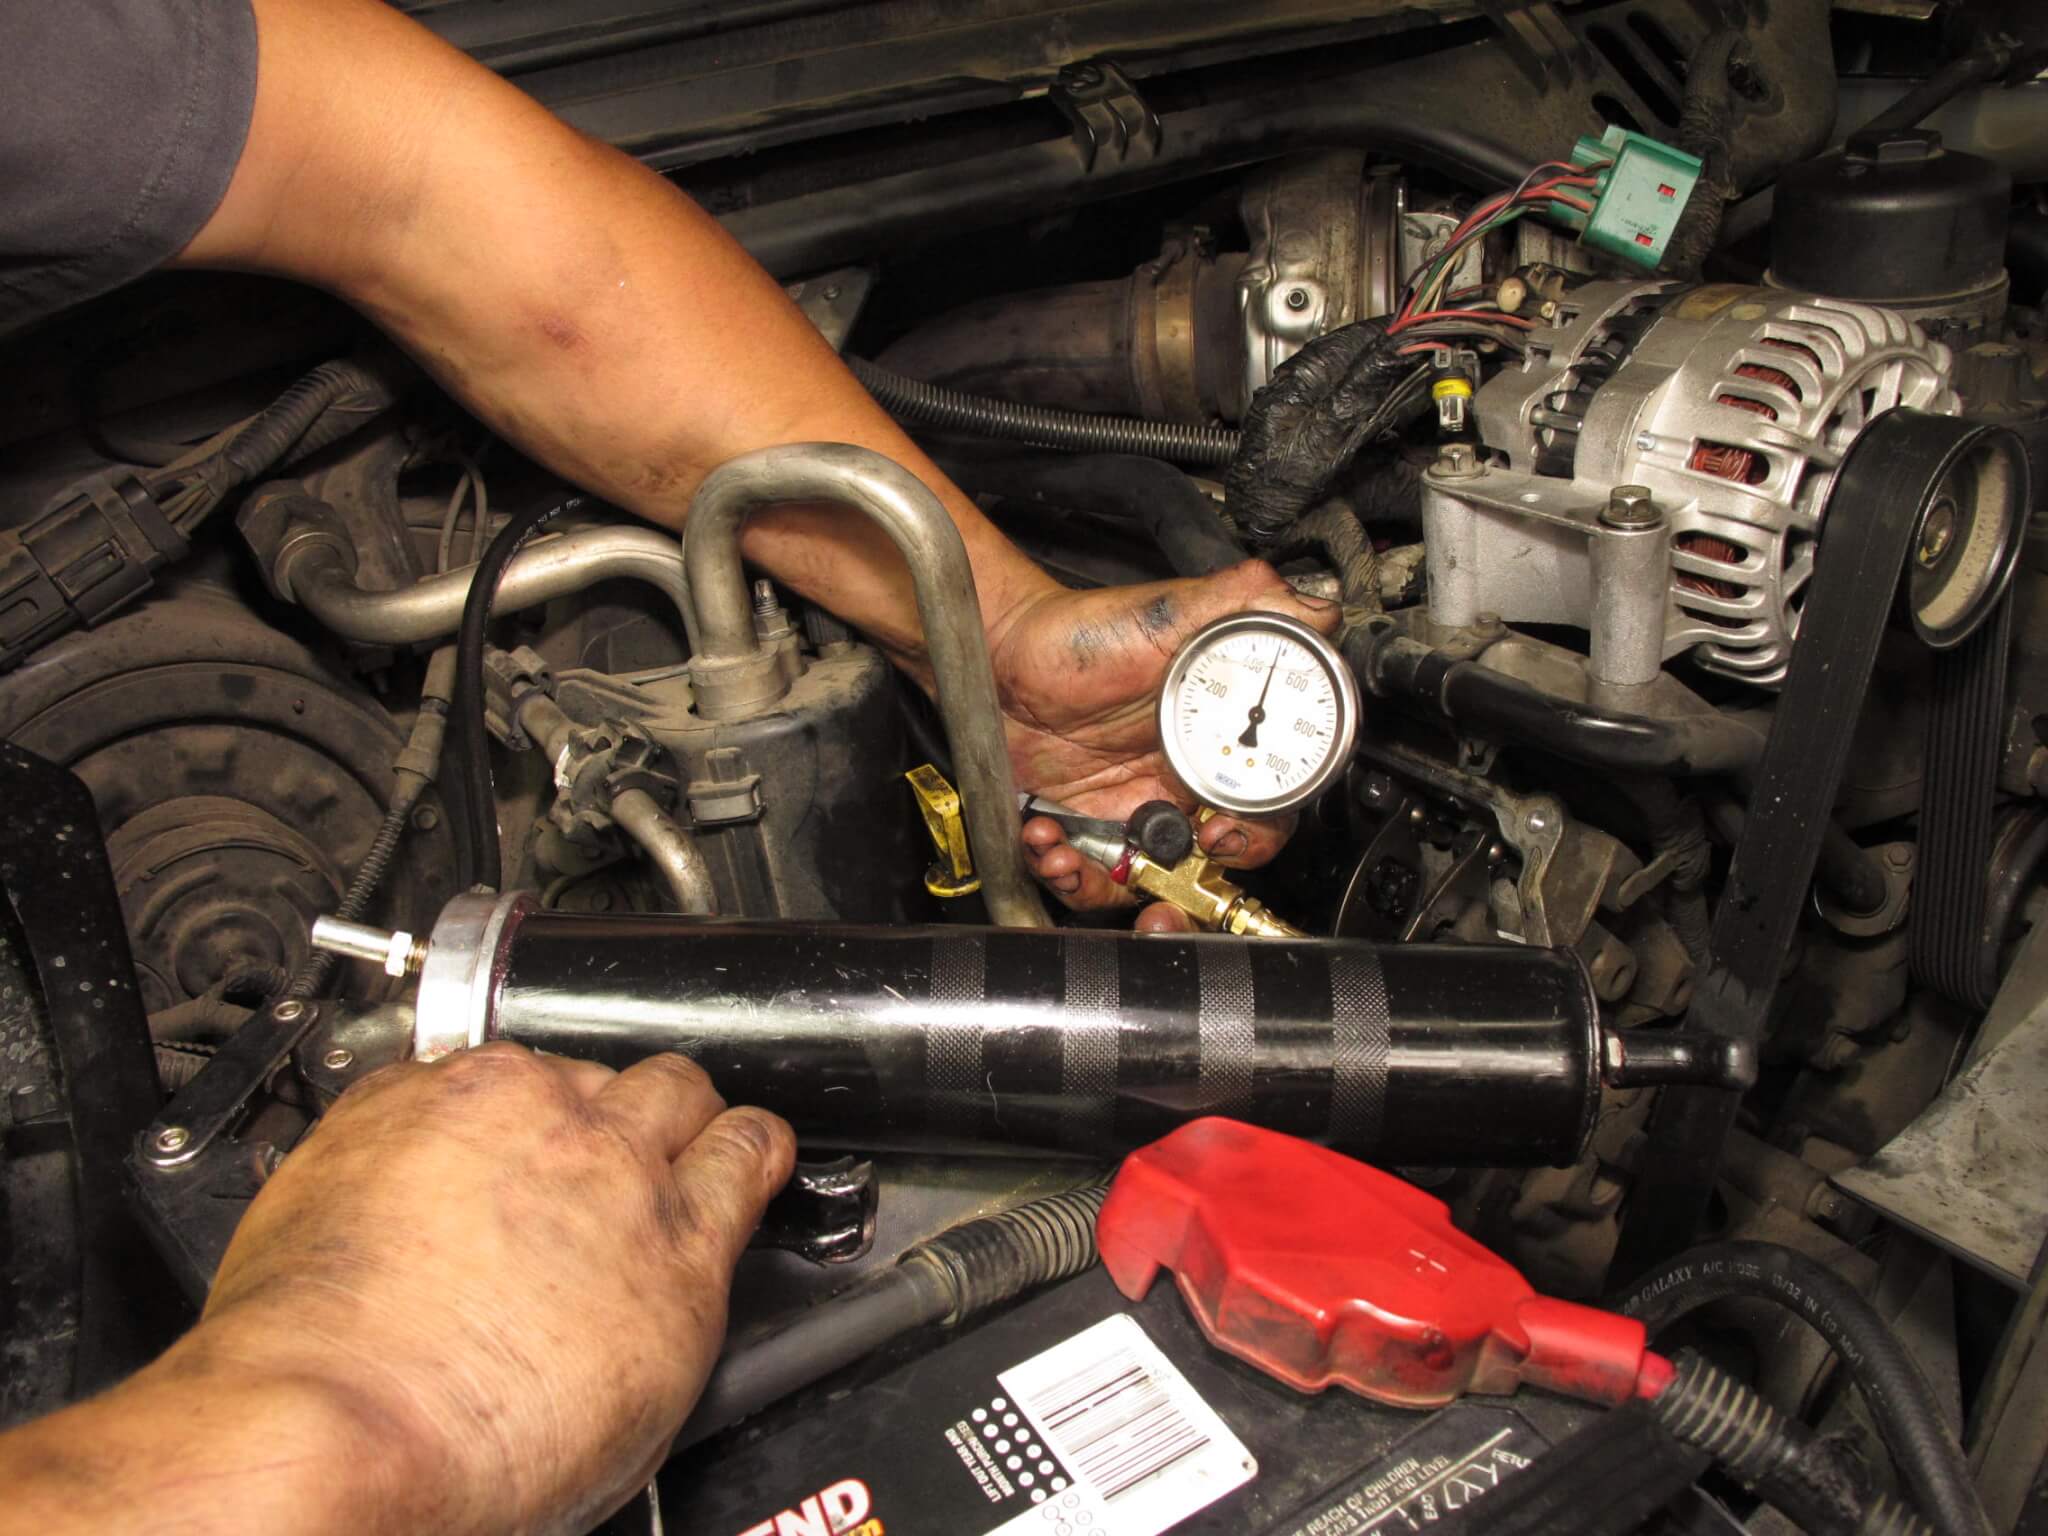 14. To obtain the pressure needed to force the sealant into the injector bore crack, hydraulic action is required. A simple grease gun is all that’s needed but a special tool in the kit ensures that you reach the proper pressure.